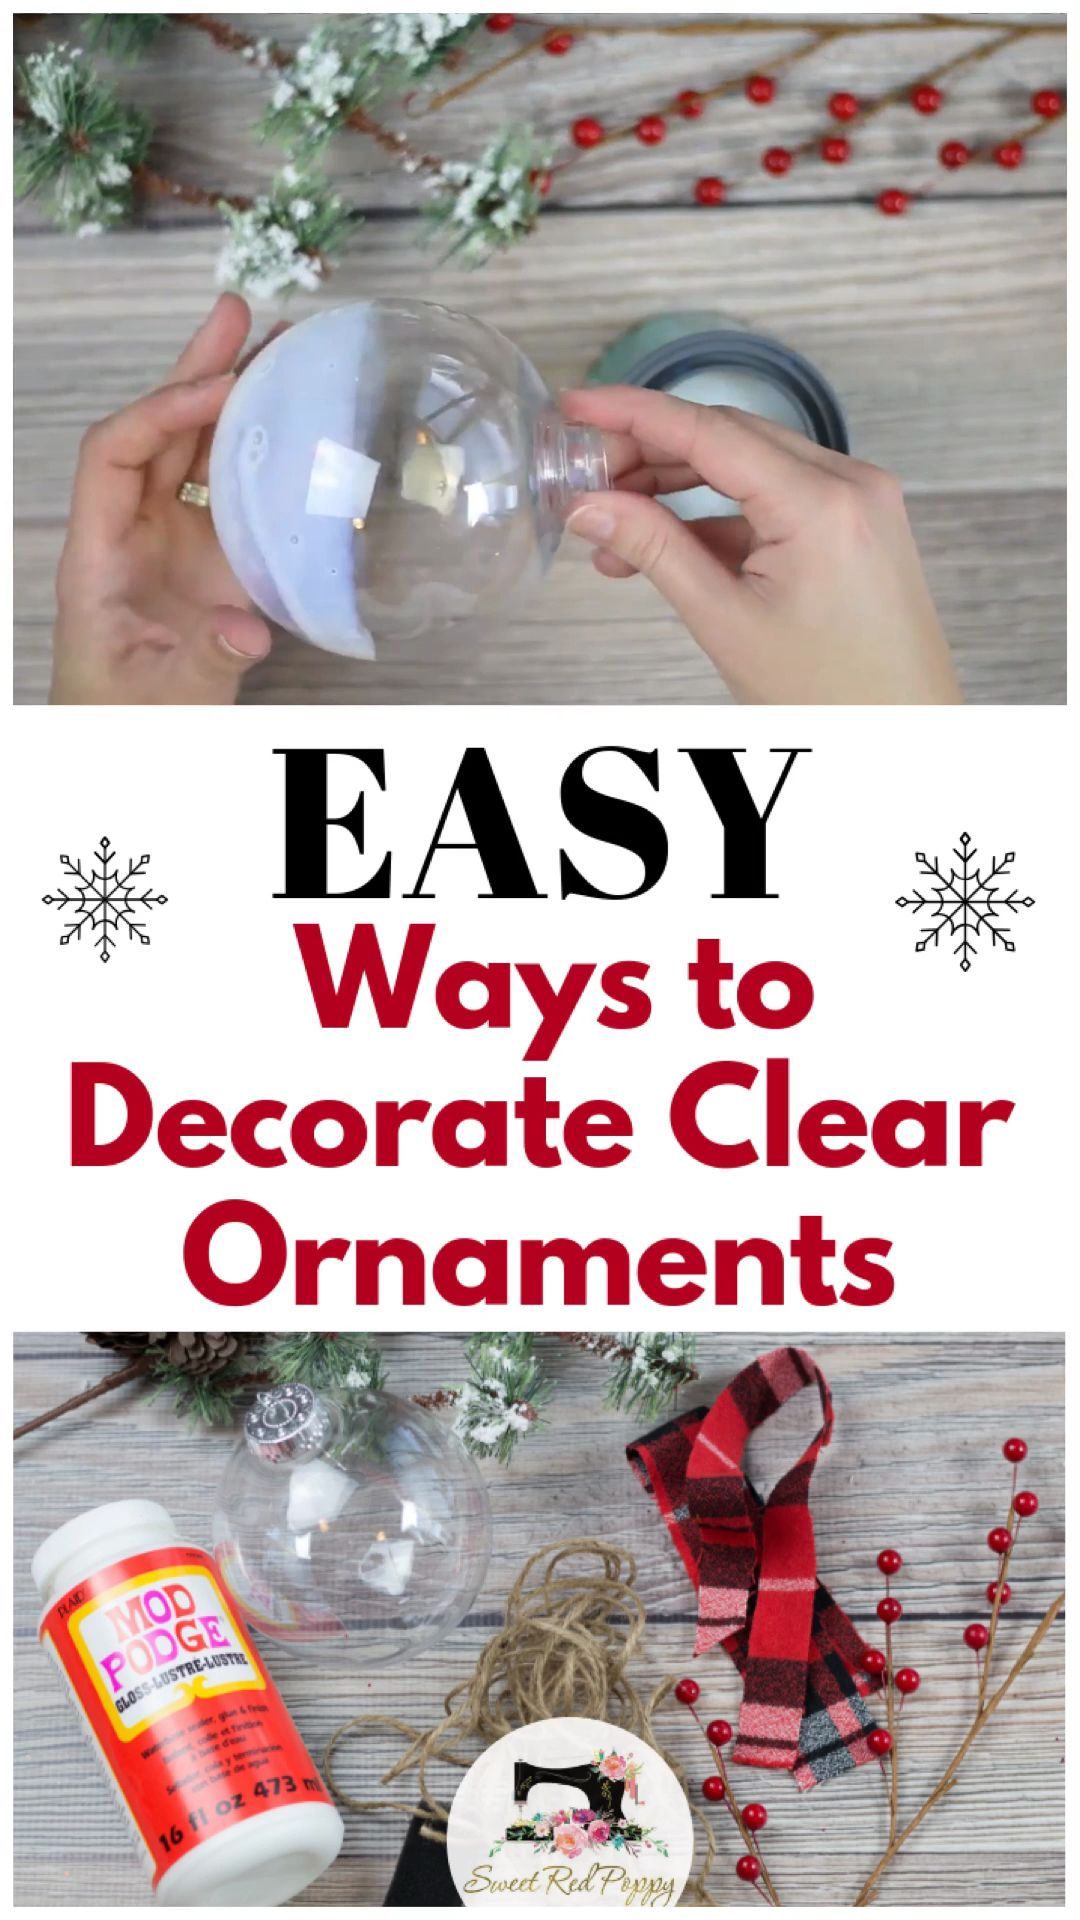 Easy Ways to Decorate Clear Plastic Ornaments for Christmas - Sweet Red Poppy -   25 diy Christmas videos ideas